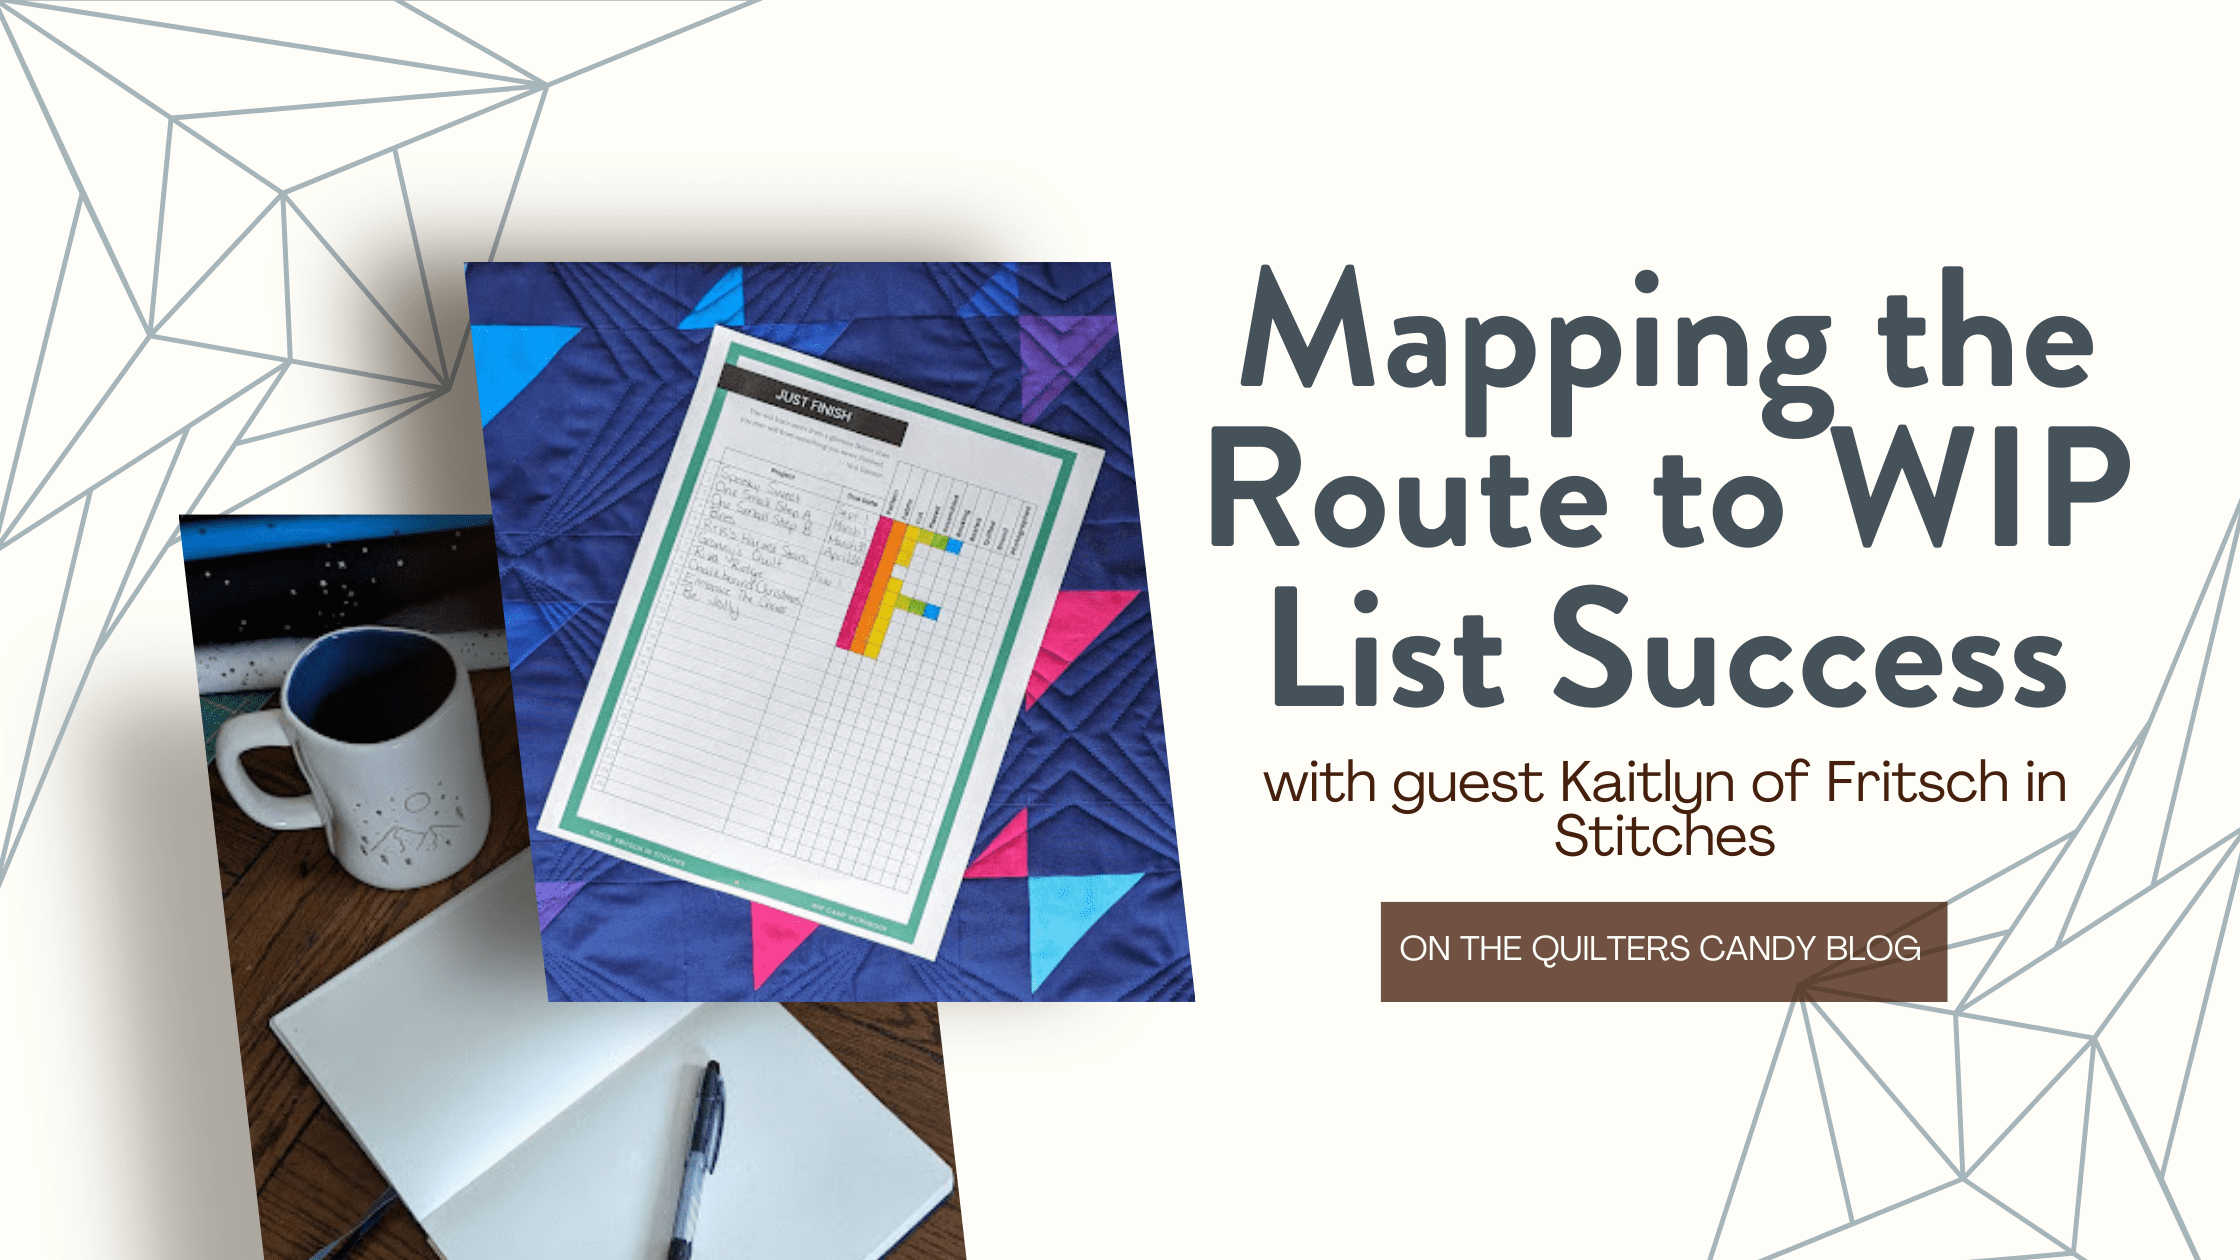 Mapping the Route to WIP List Success